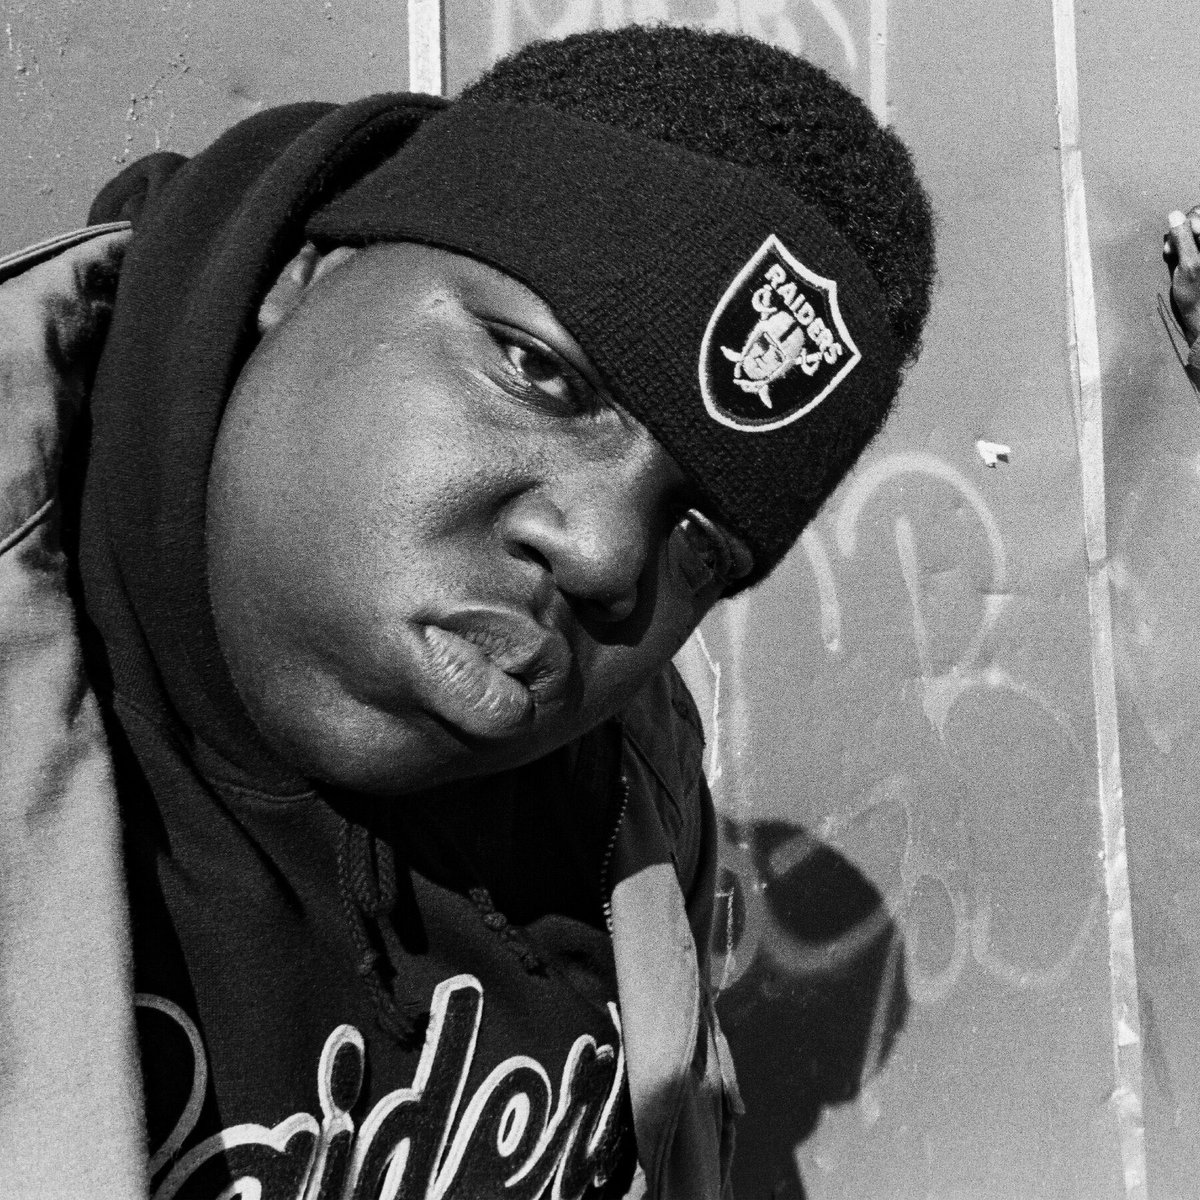 Happy heavenly birthday to the Notorious one. Your legacy lives on 🕊️👑🎙️🔊 #ripthenotoriousbig #ripbiggiesmalls #ripbig #biggie #hiphop